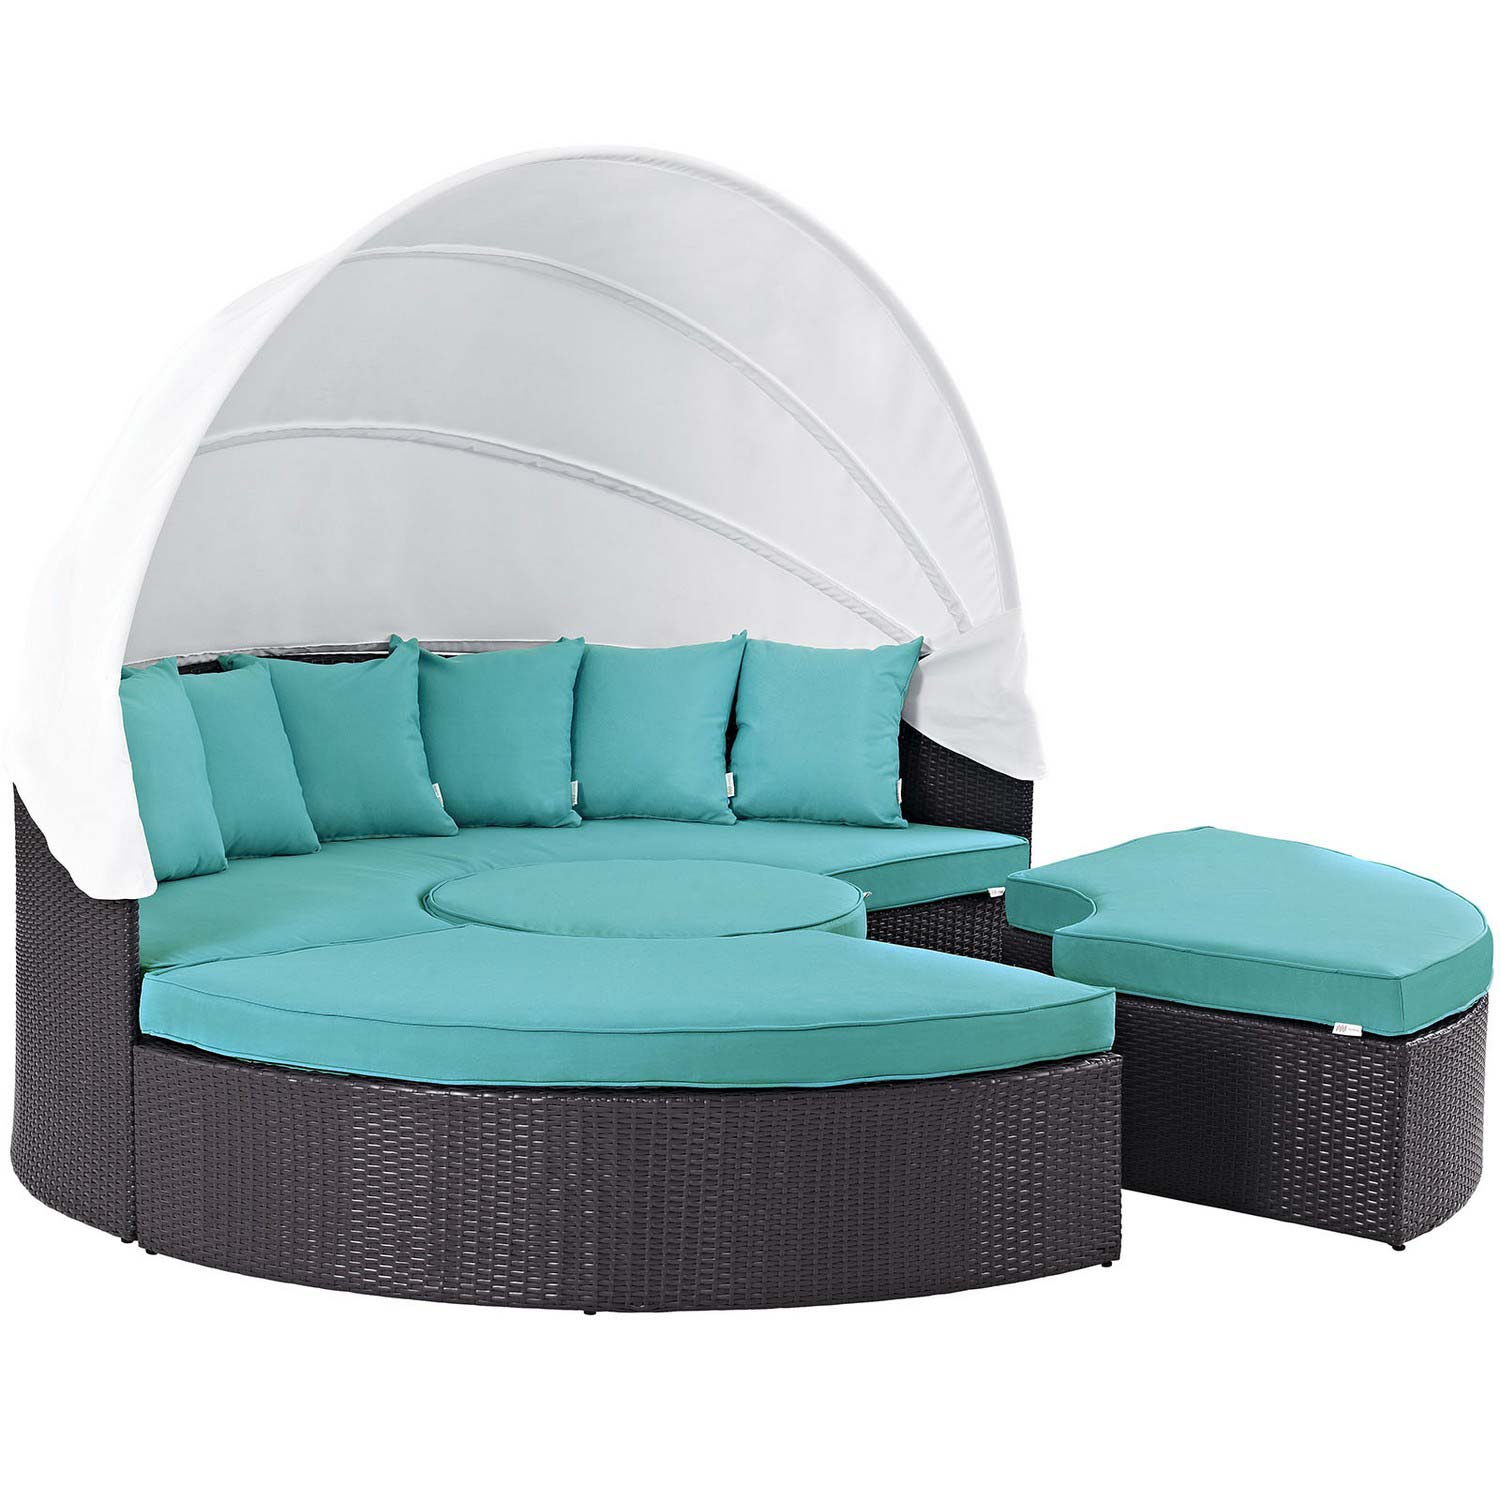 Modway Convene Canopy Outdoor Patio Daybed - Espresso/Turquoise